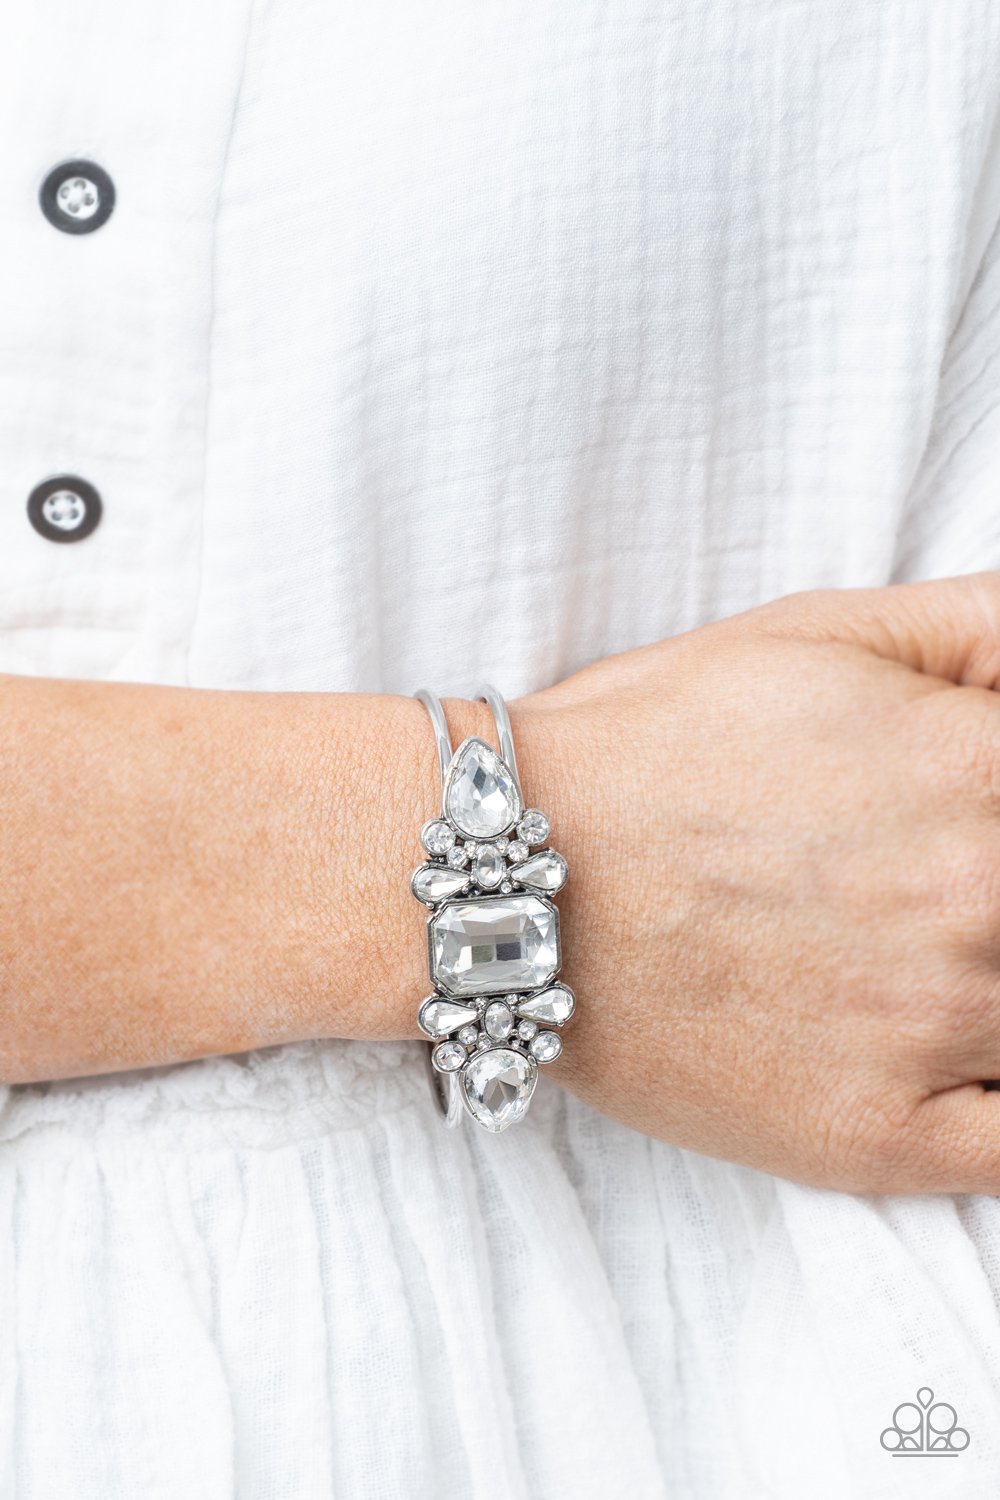 Paparazzi Accessories - Call Me Old Fashioned - White (Bling) Bracelet